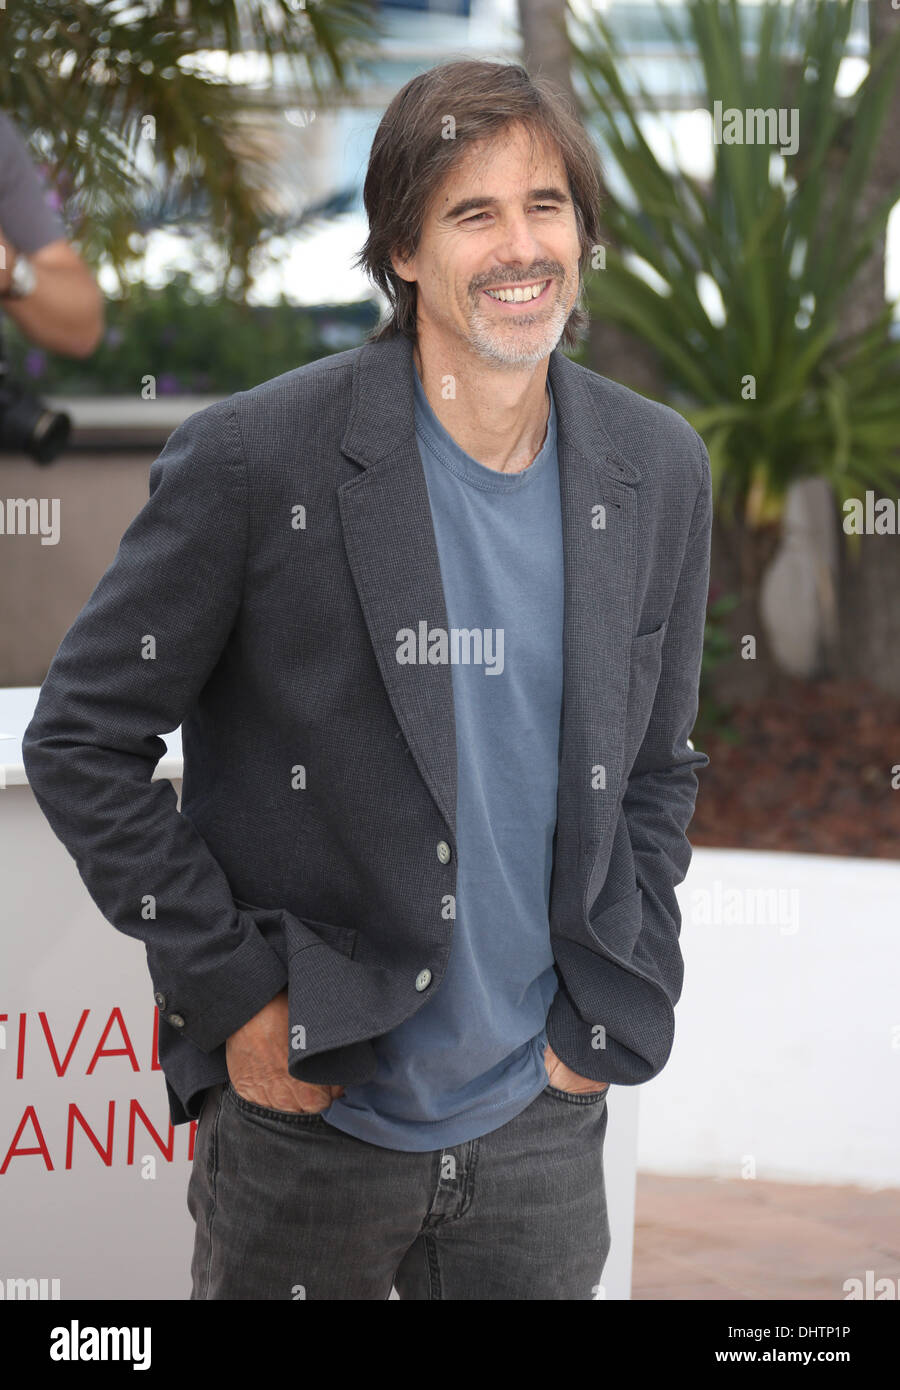 Walter Salles 'On the Road' photocall during the 65th Cannes Film Festival Cannes, France - 23.05.12 Stock Photo